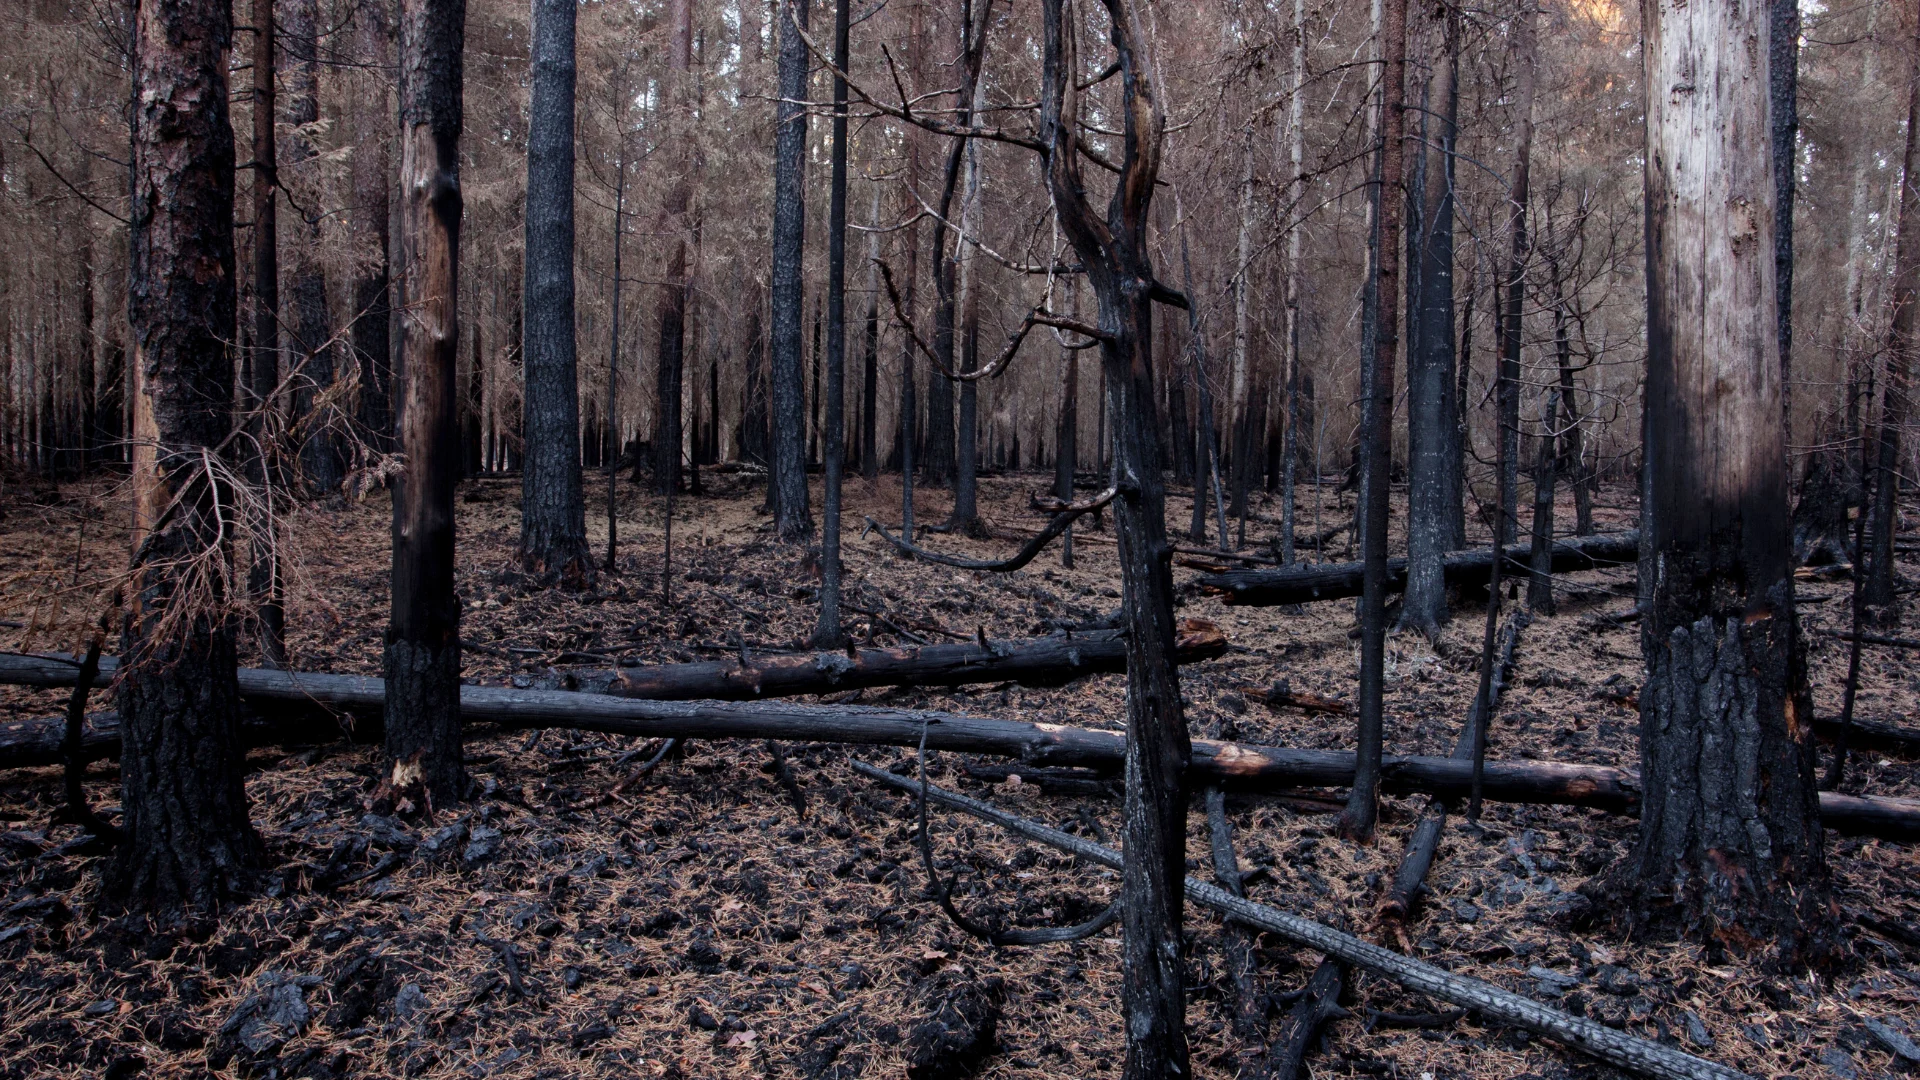 'Zombie fires' are occurring more frequently in boreal forests